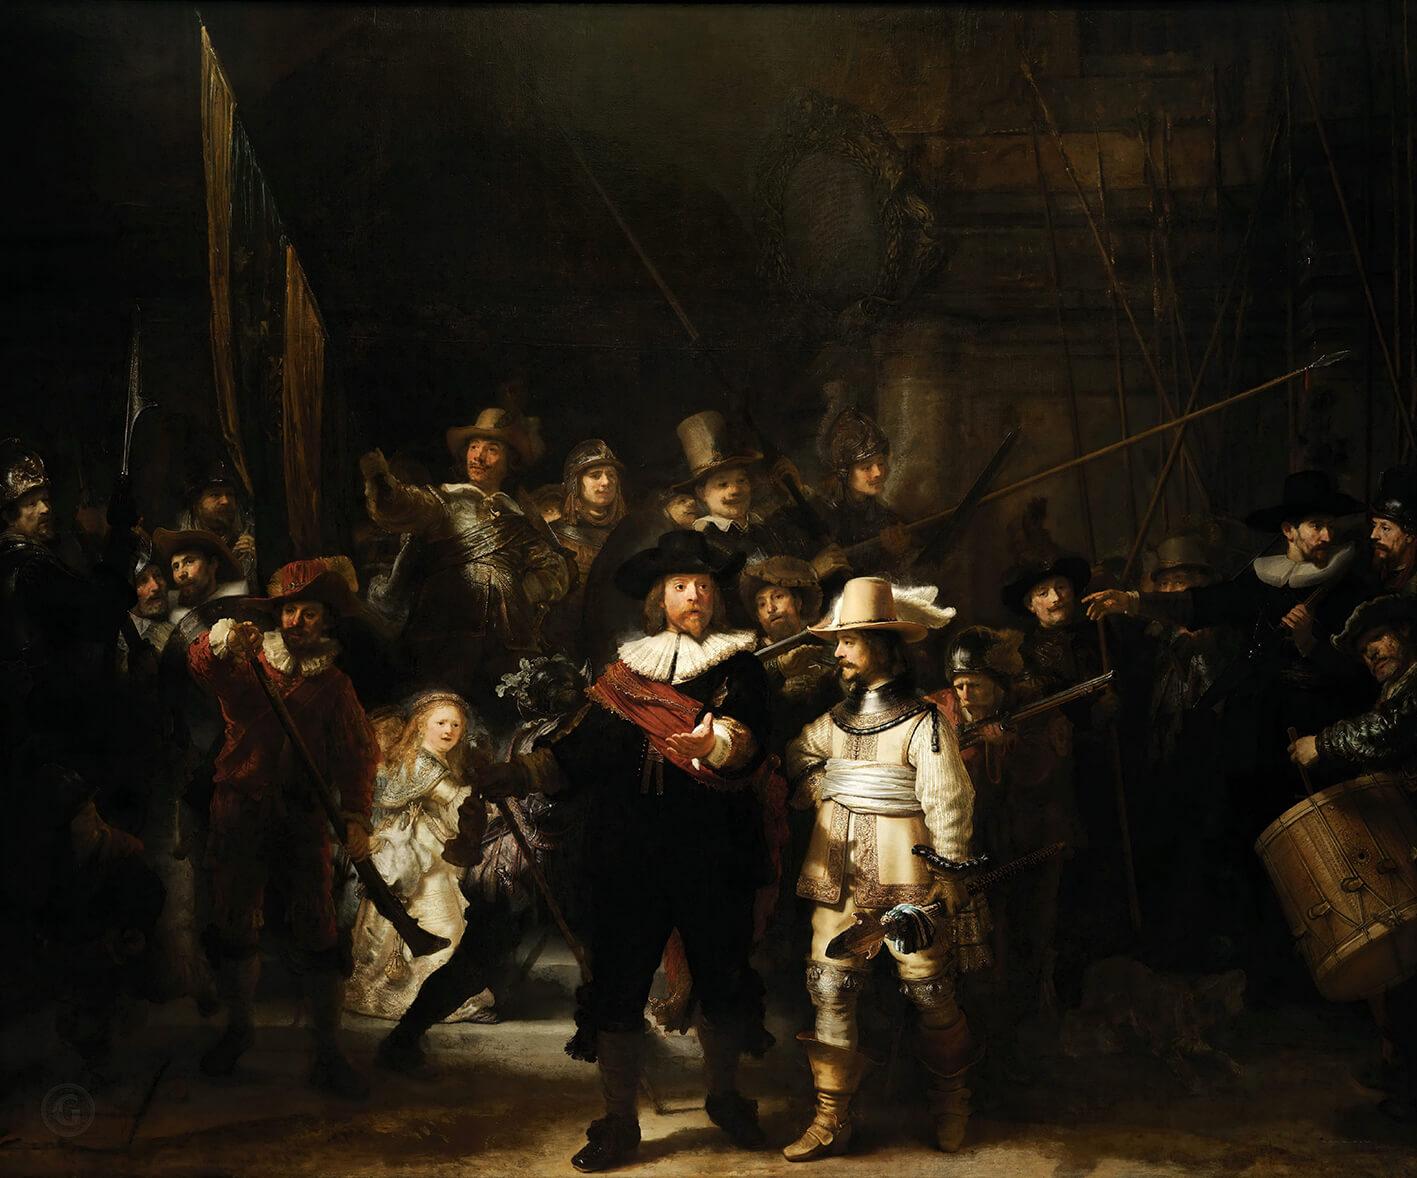 Picture Rembrandt - The Night Watch 2